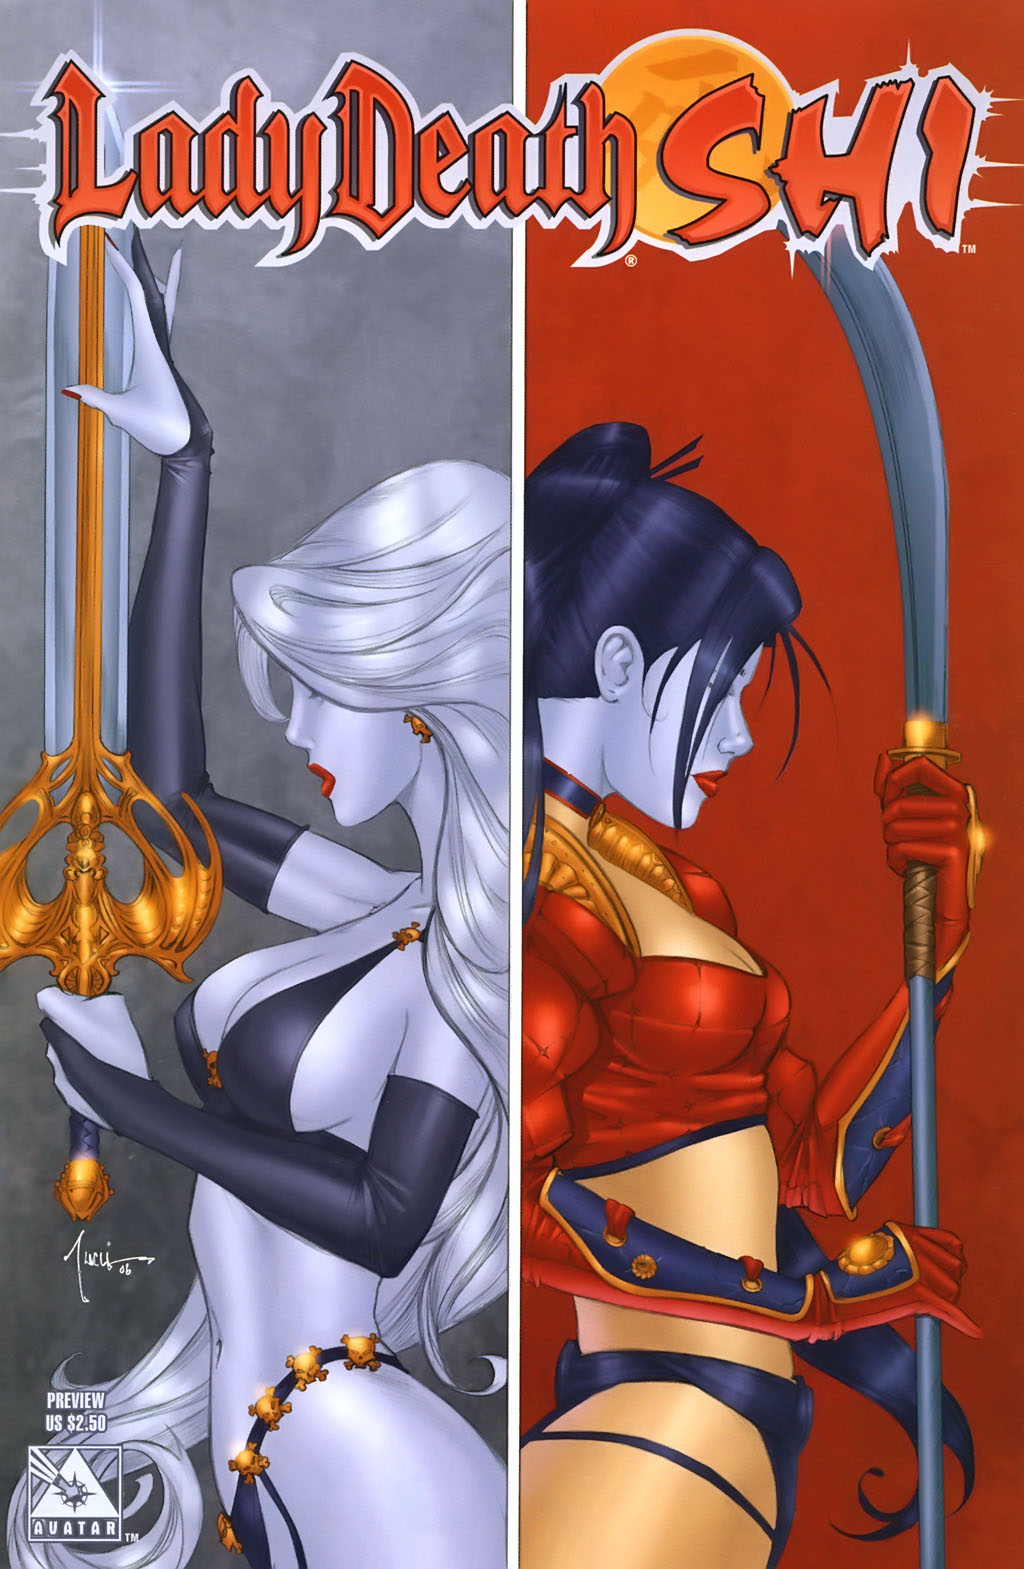 Read online Lady Death/Shi comic -  Issue # _Preview - 8